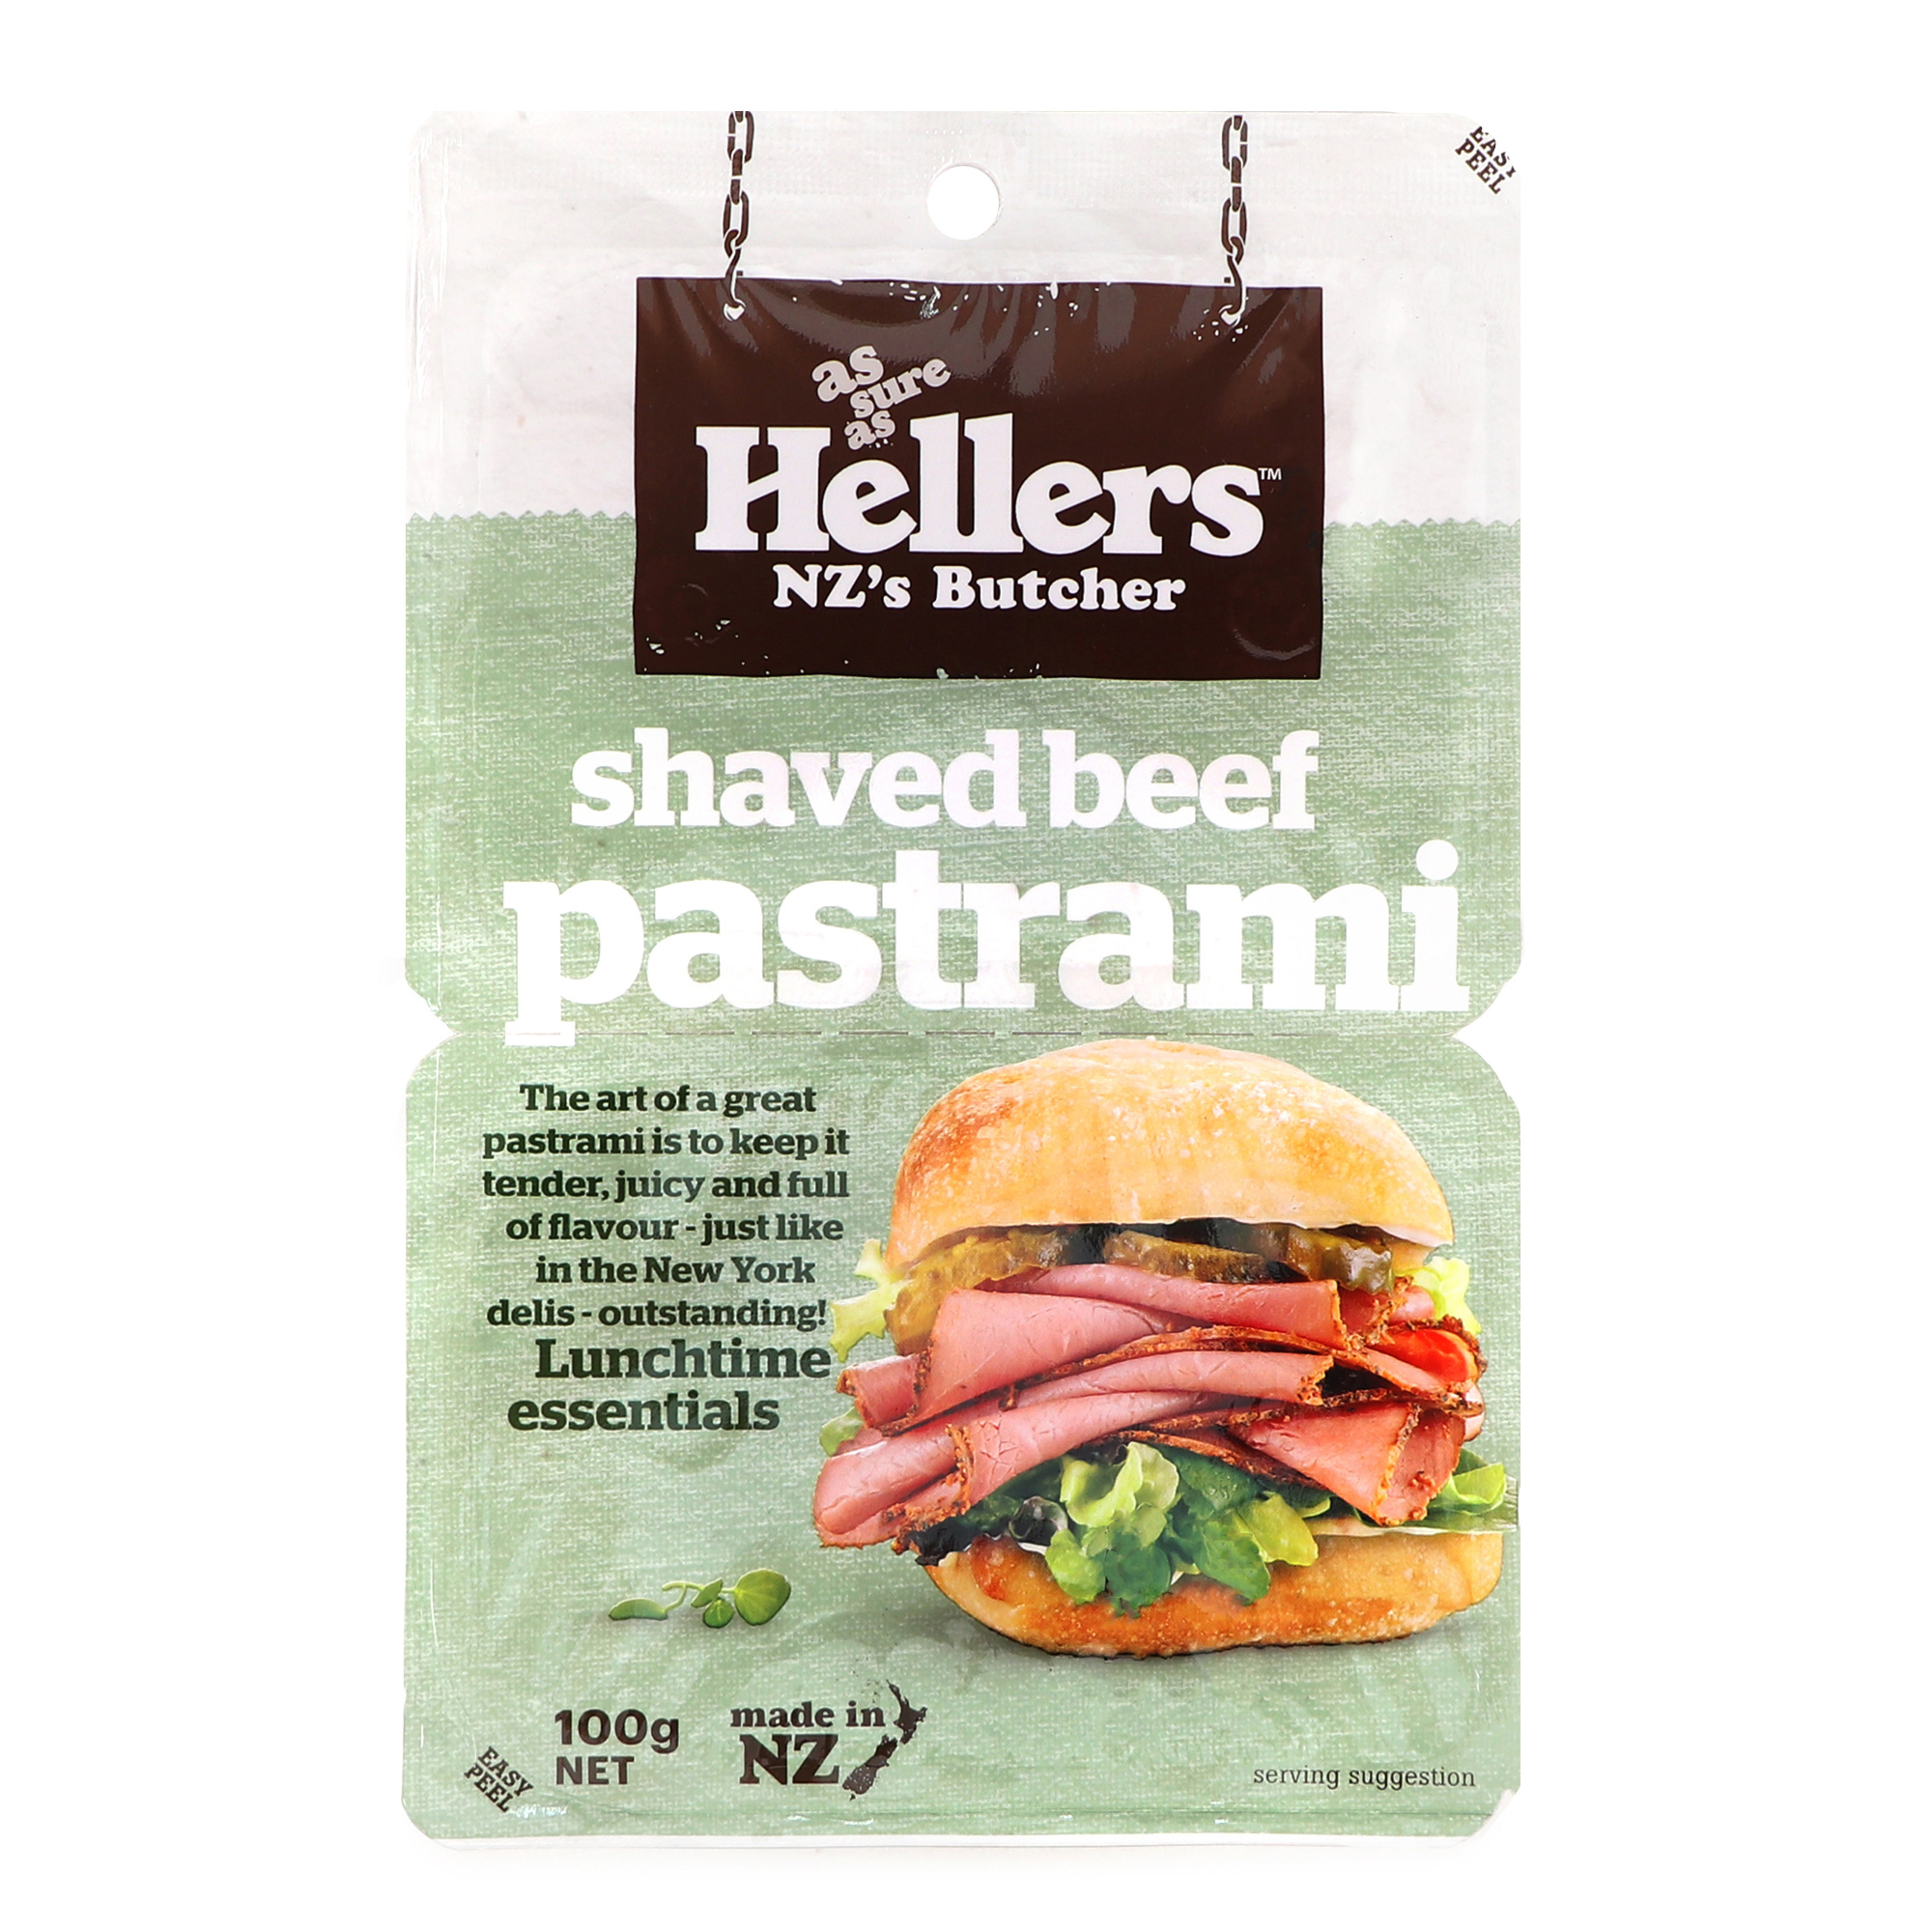 Hellers Shaved Beef Pastrami 100g - NZ*